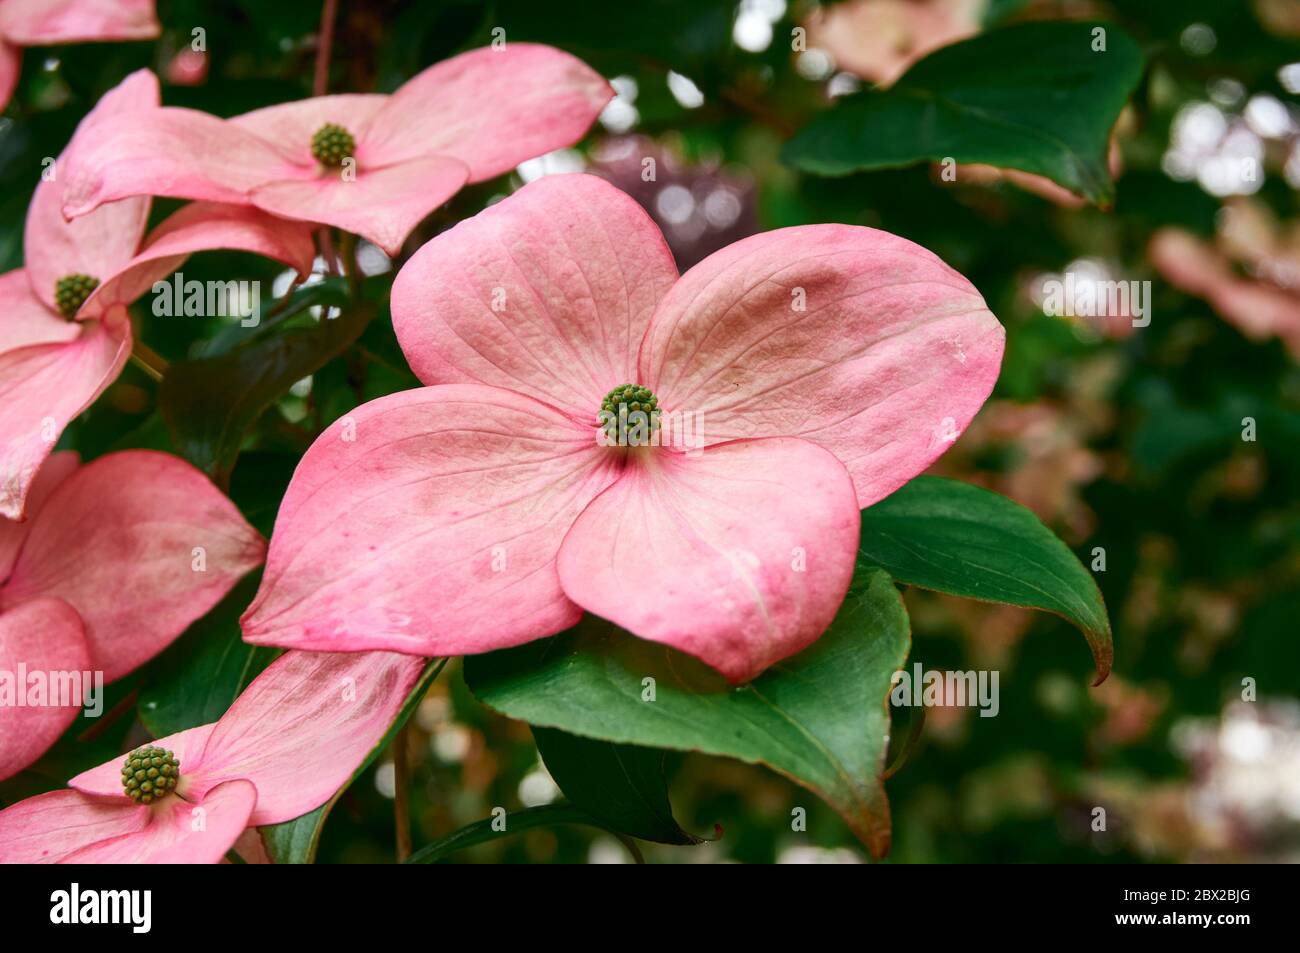 Closeup of red dogwood flowers blooming in spring, Vancouver, British Columbia, Canada Stock Photo